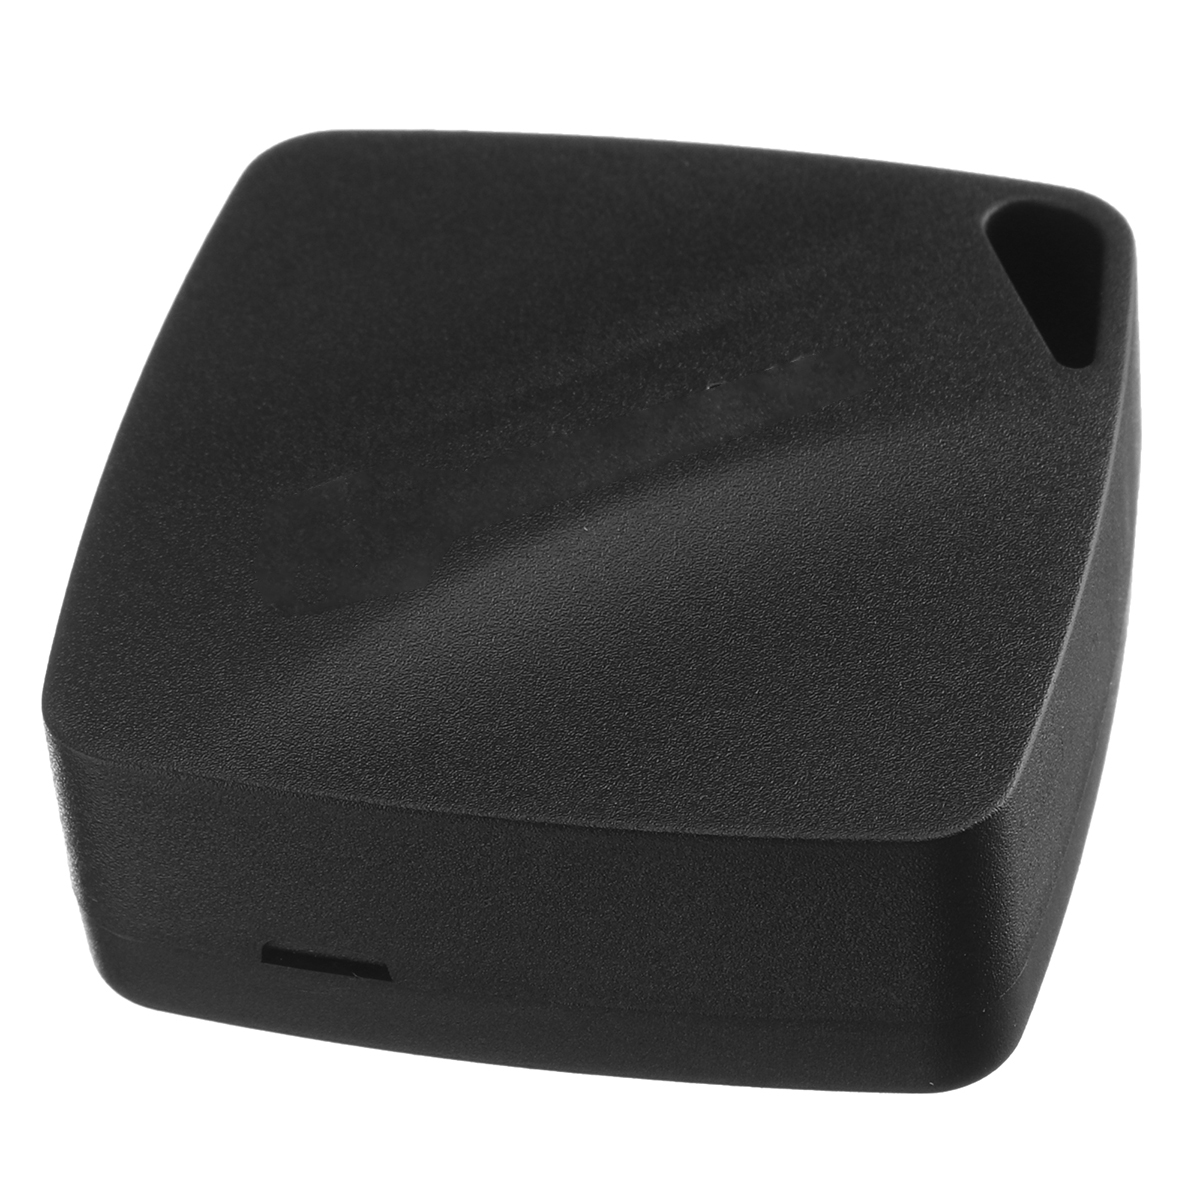 Square-Waterproof-Black-Tracking-Device-Base-Station-Positioning-Location-1725758-3